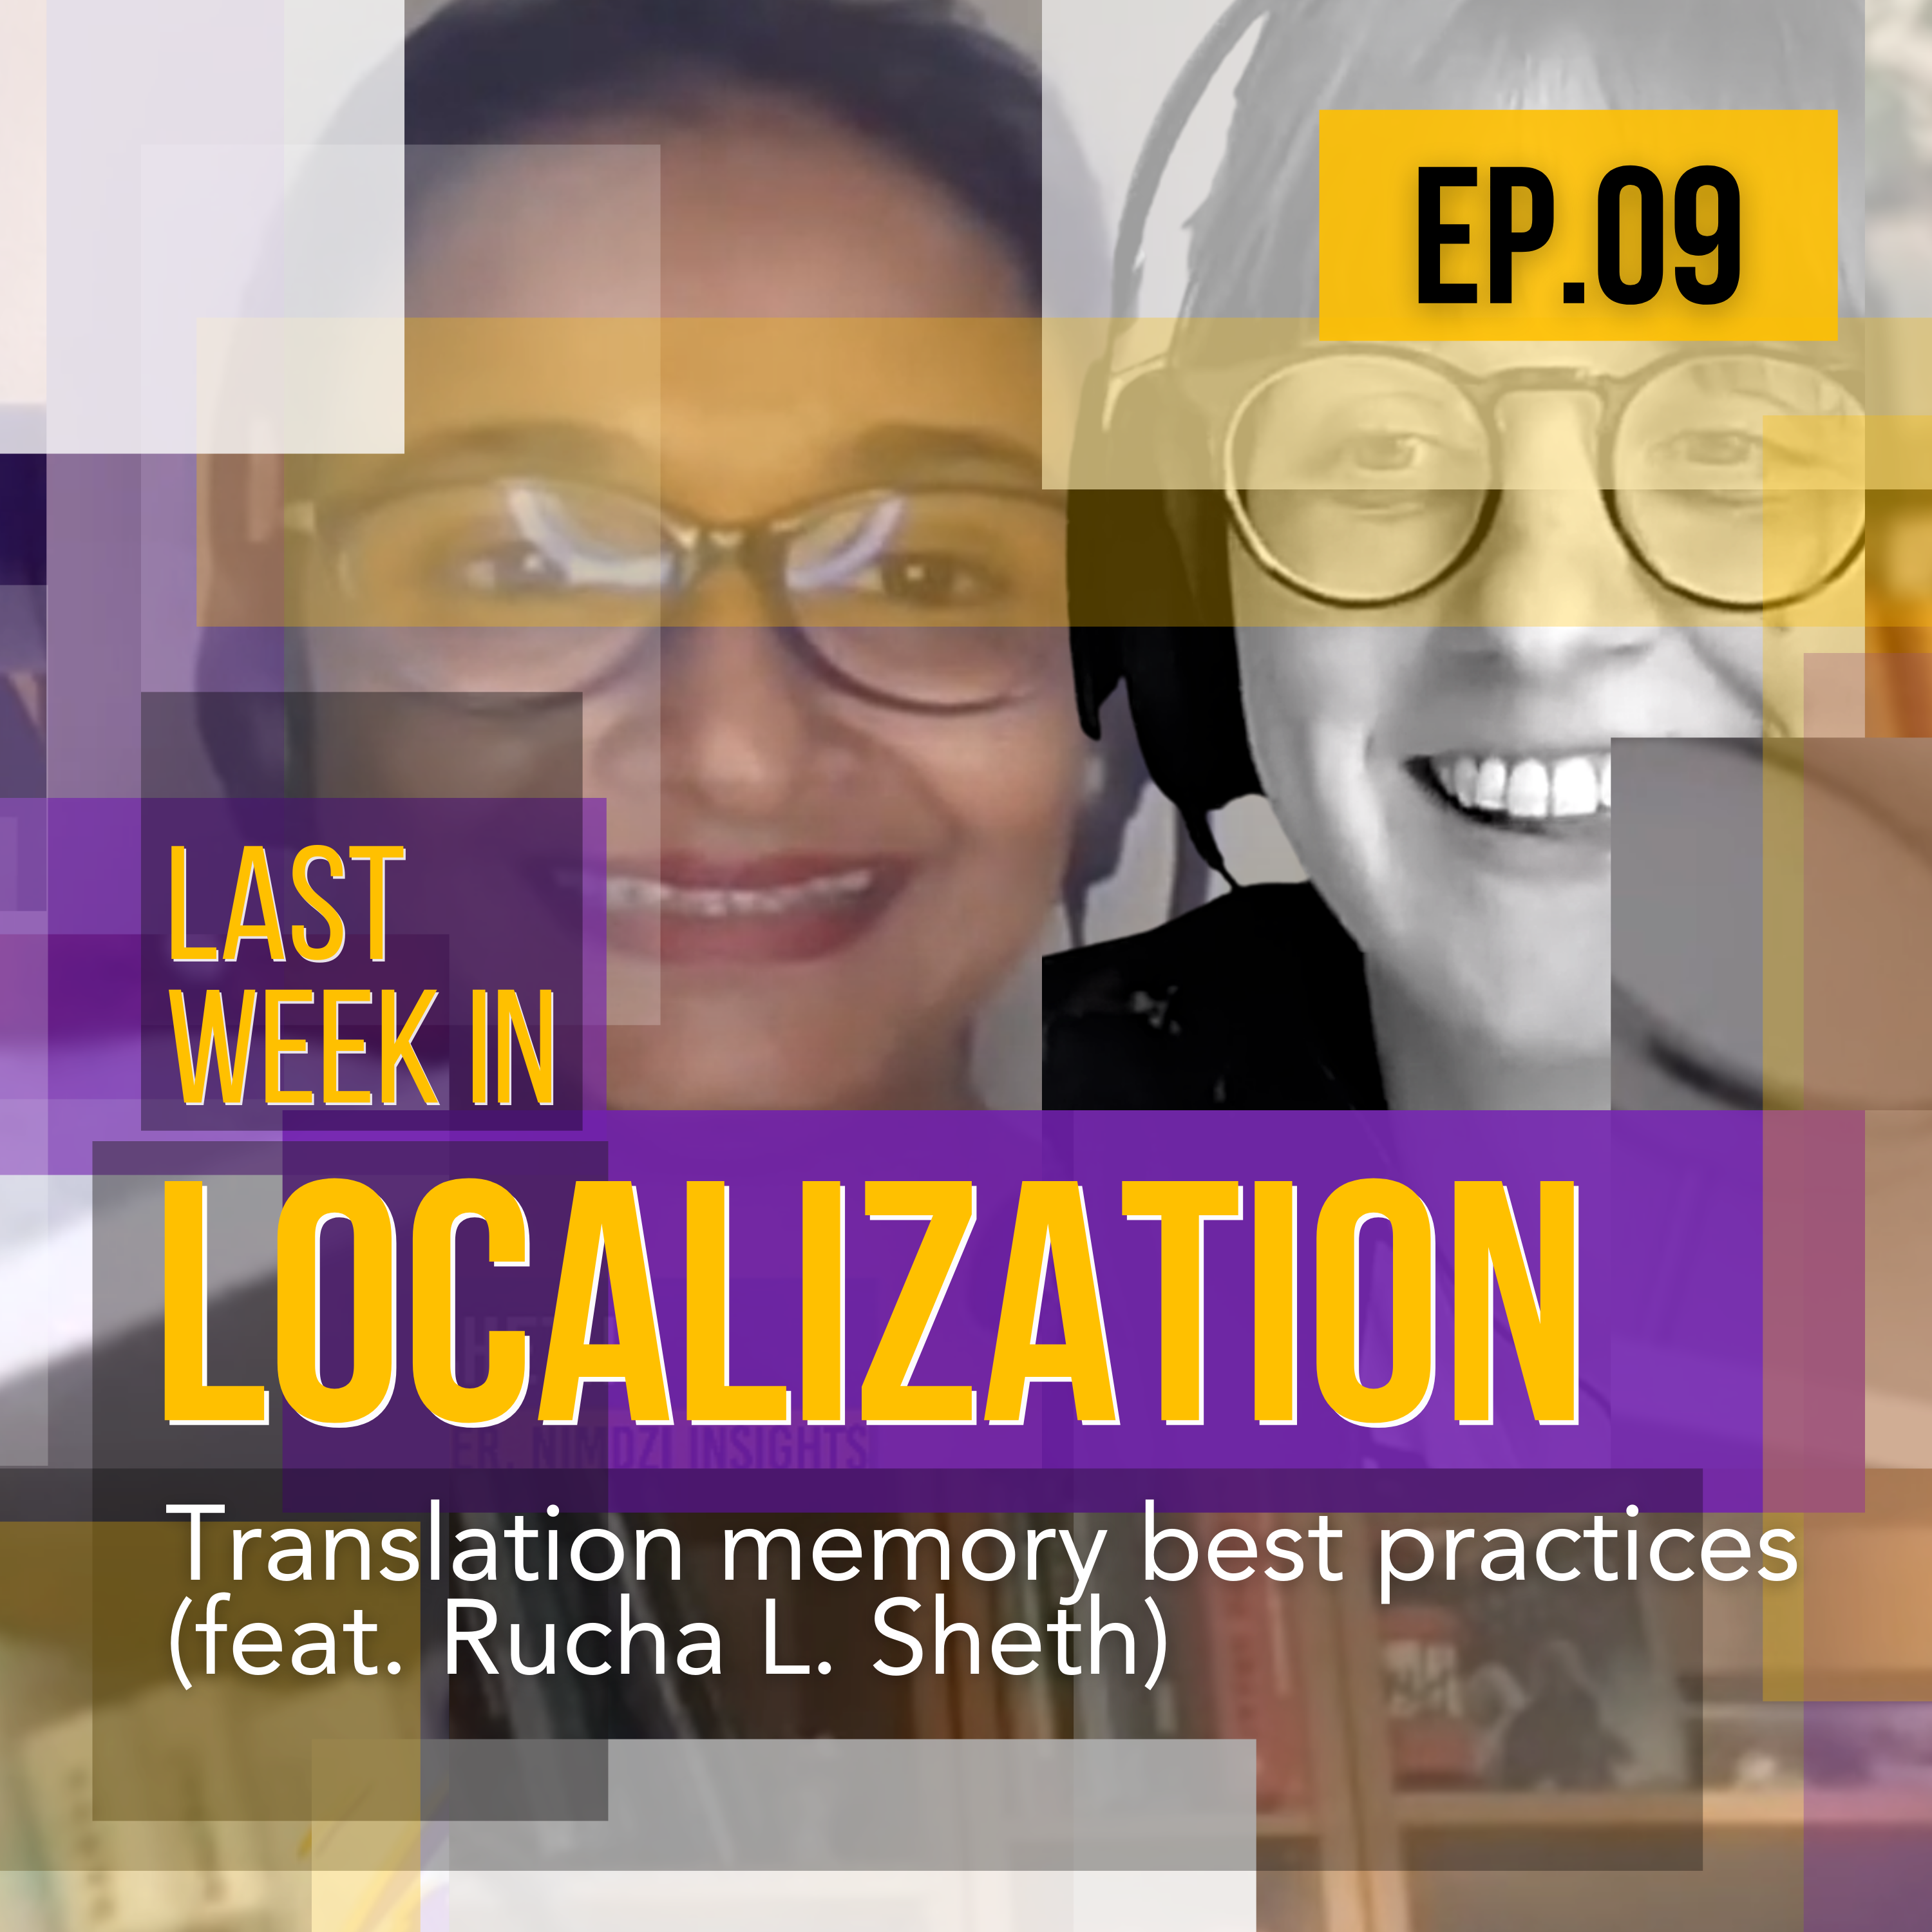 Translation memory best practices (feat Rucha L. Sheth)